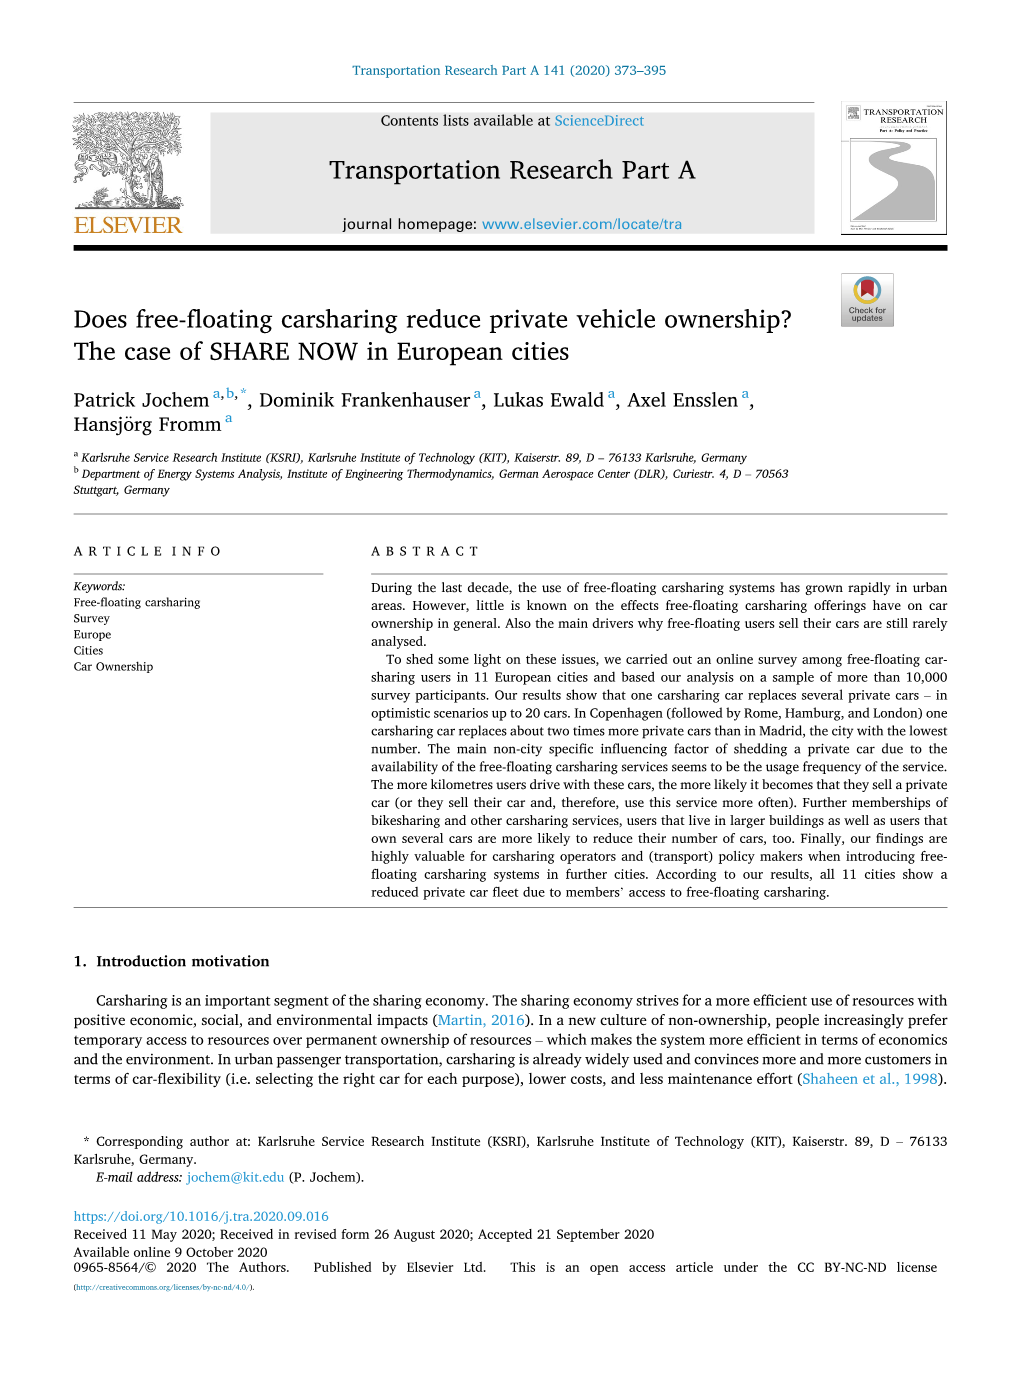 Does Free-Floating Carsharing Reduce Private Vehicle Ownership? the Case of SHARE NOW in European Cities